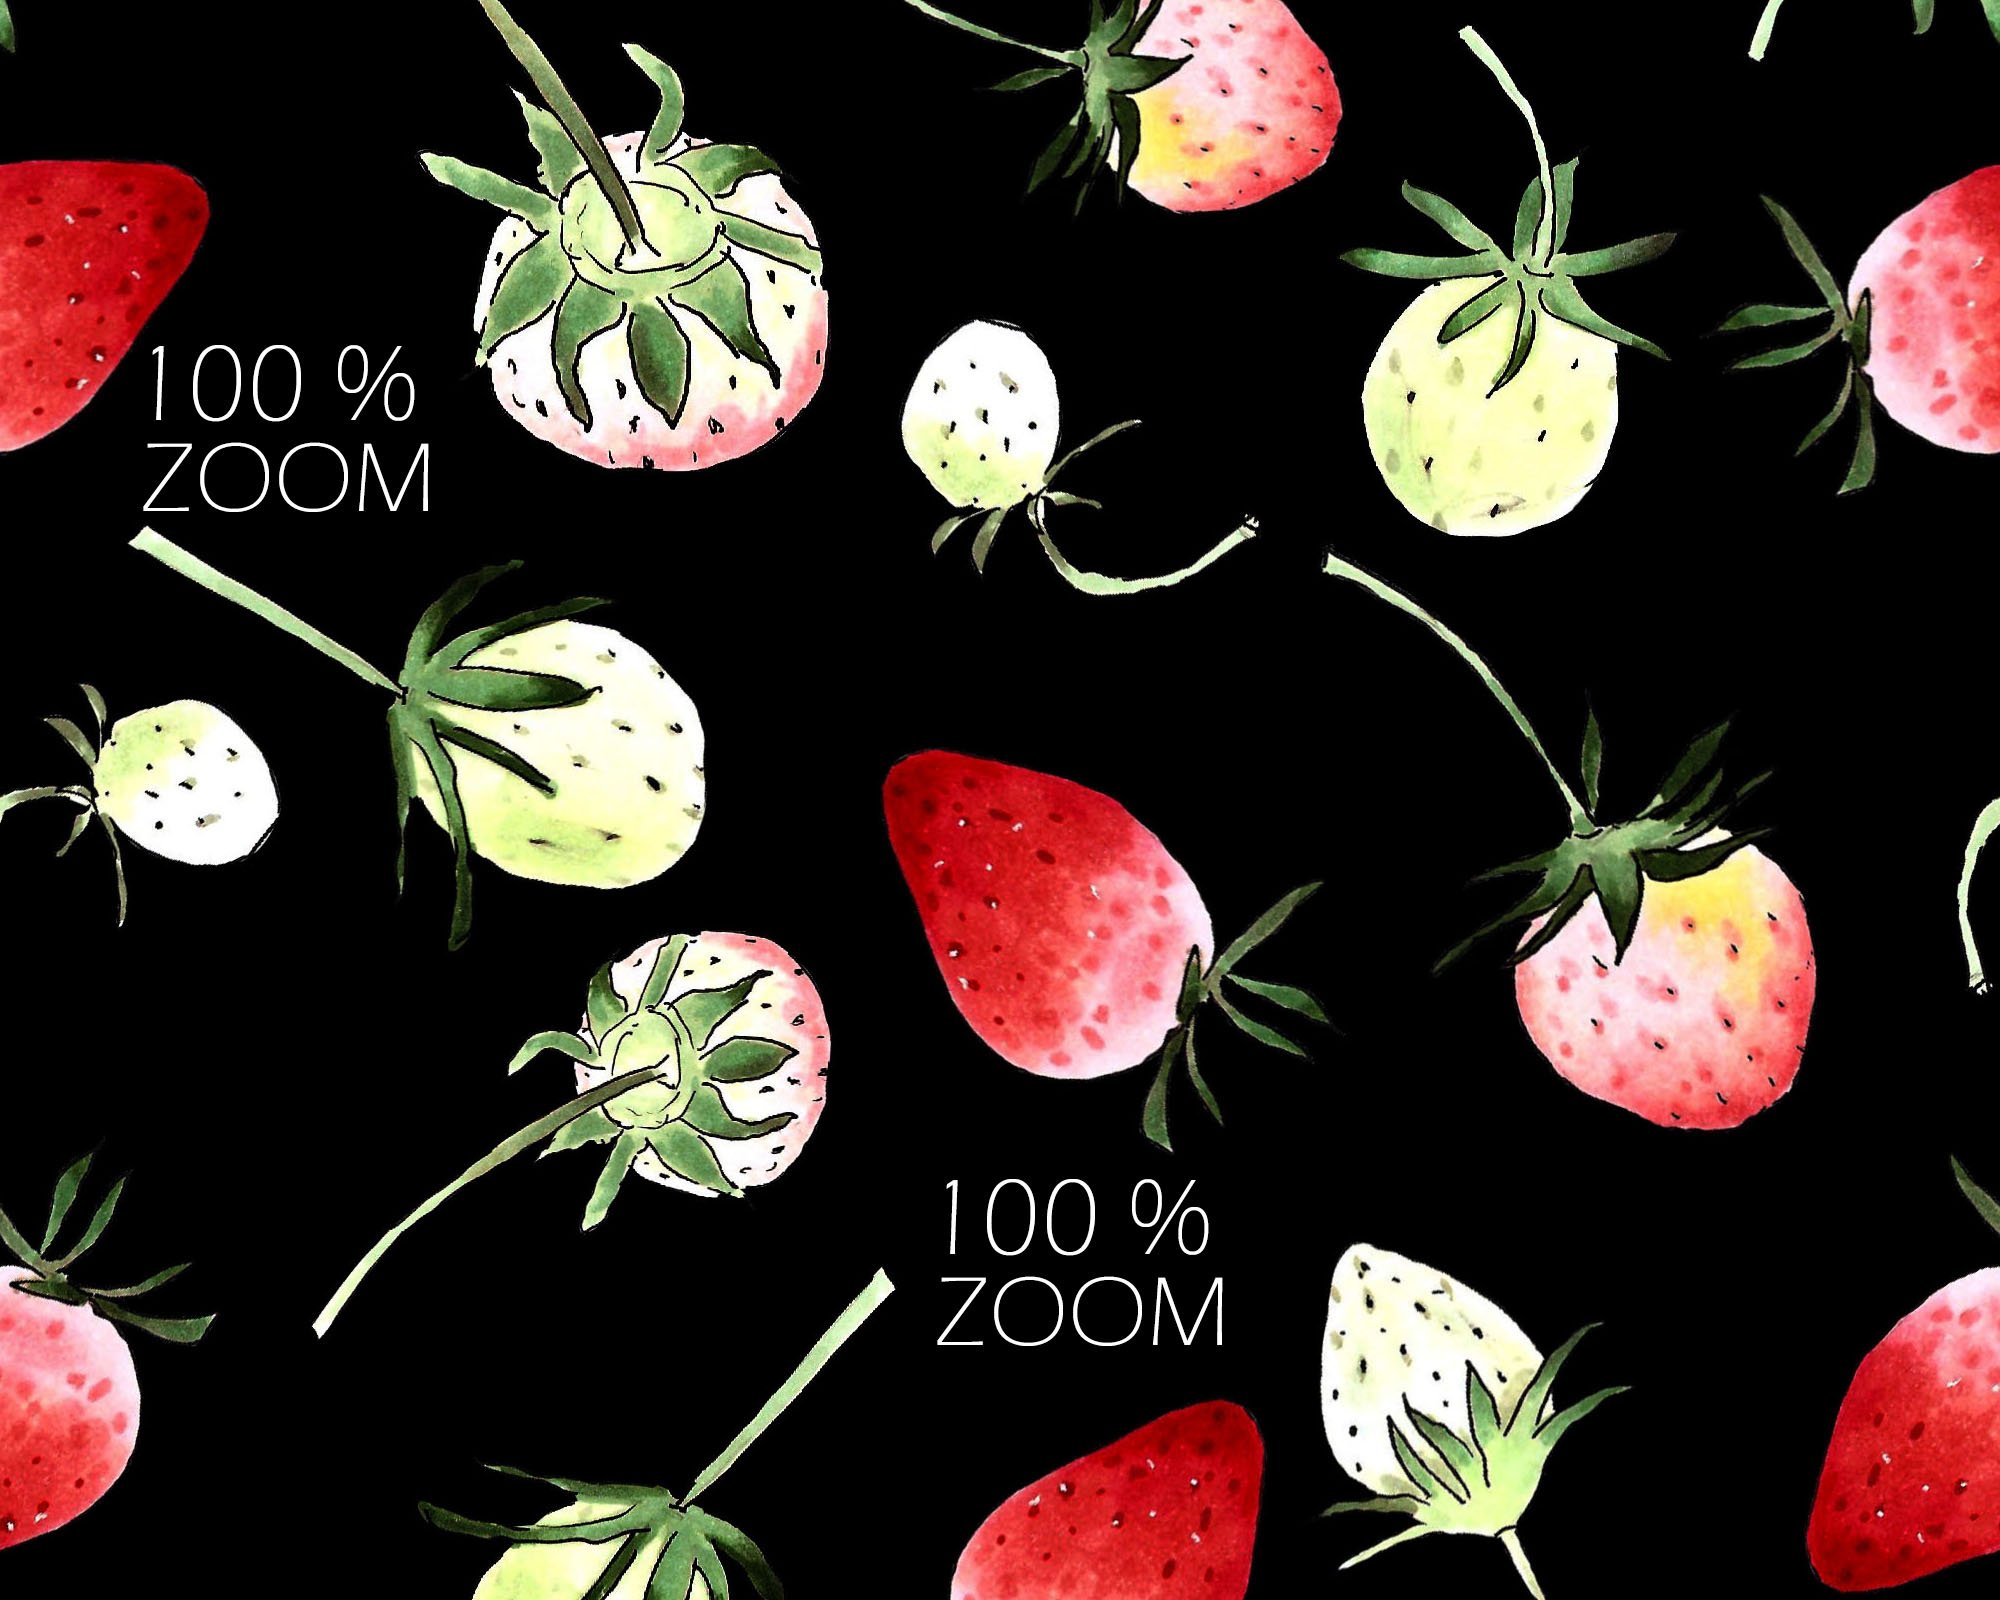 Illustration of strawberries in close-up on a black background.